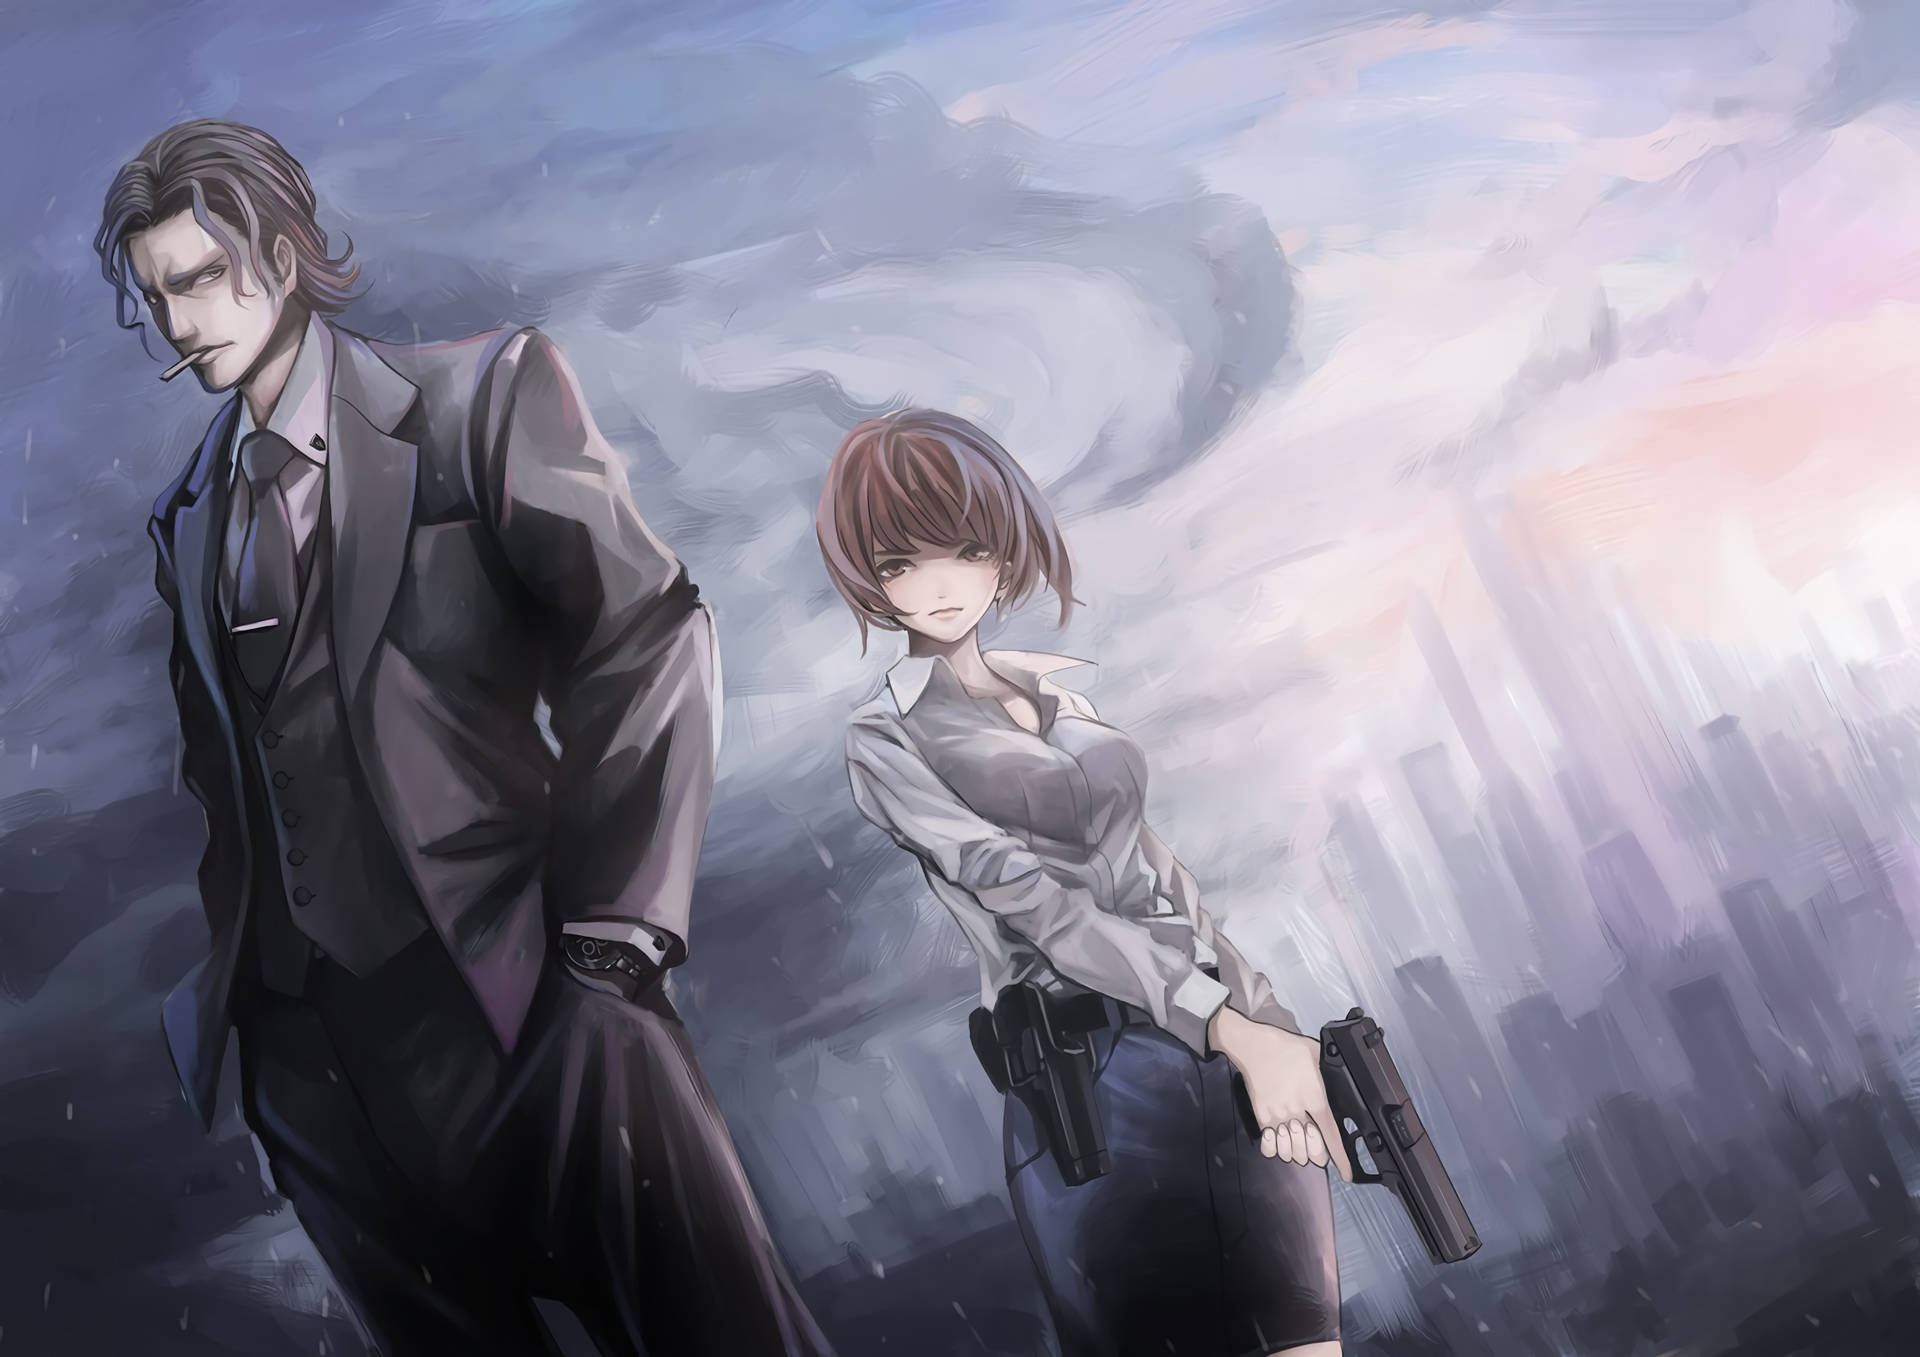 Psychopass Togane Och Akane - (this Is Already In Swedish, But Here Is A Translation To English: Psycho Pass Togane And Akane) För Desktop-tapet Eller Mobil Tapet. Wallpaper